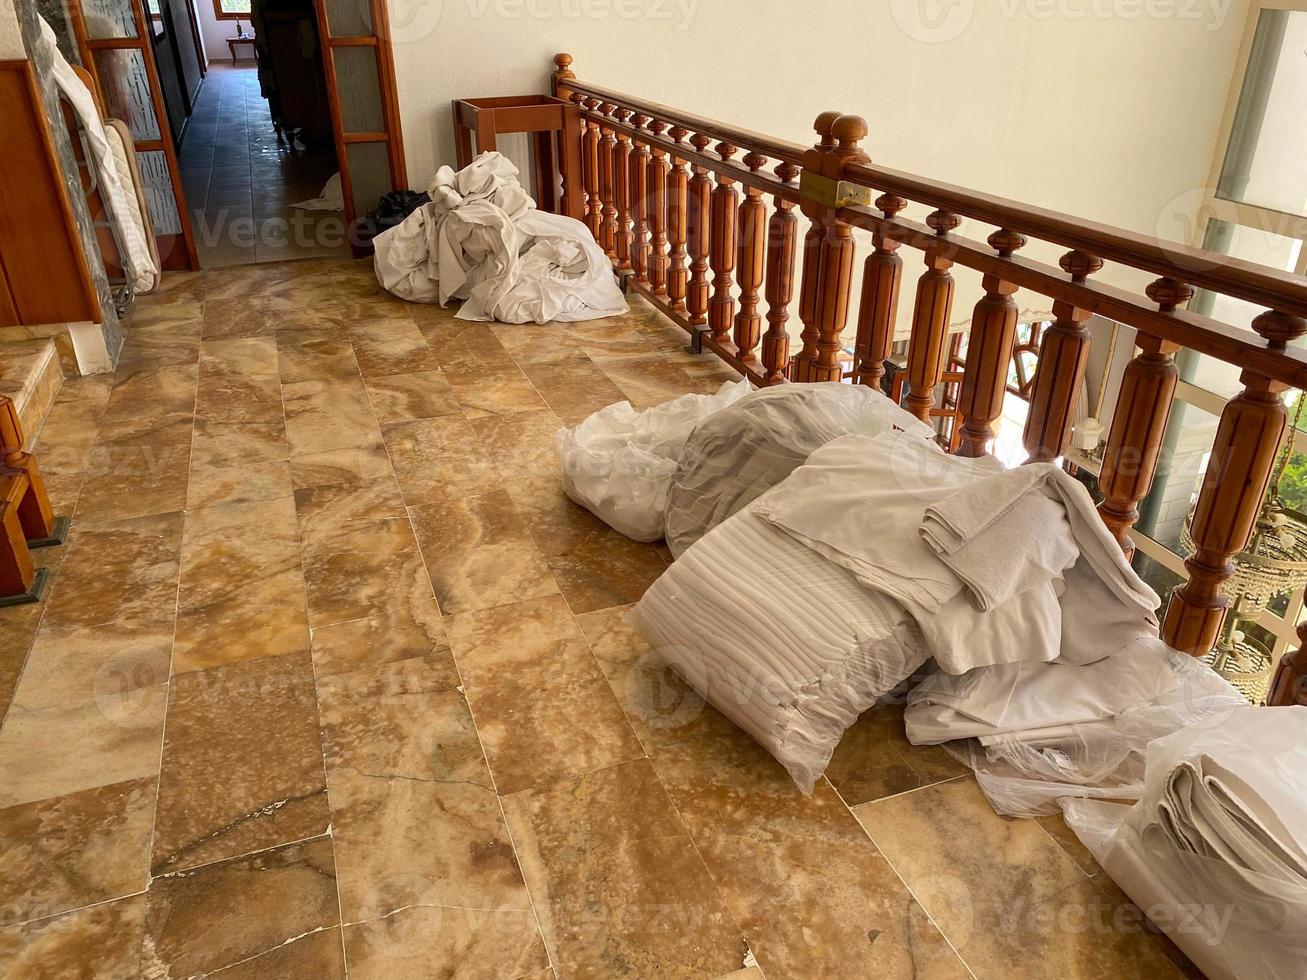 Room cleaning service in the hotel concept. The service room staff laid out bed linen in the hotel corridor for replacement and washing photo